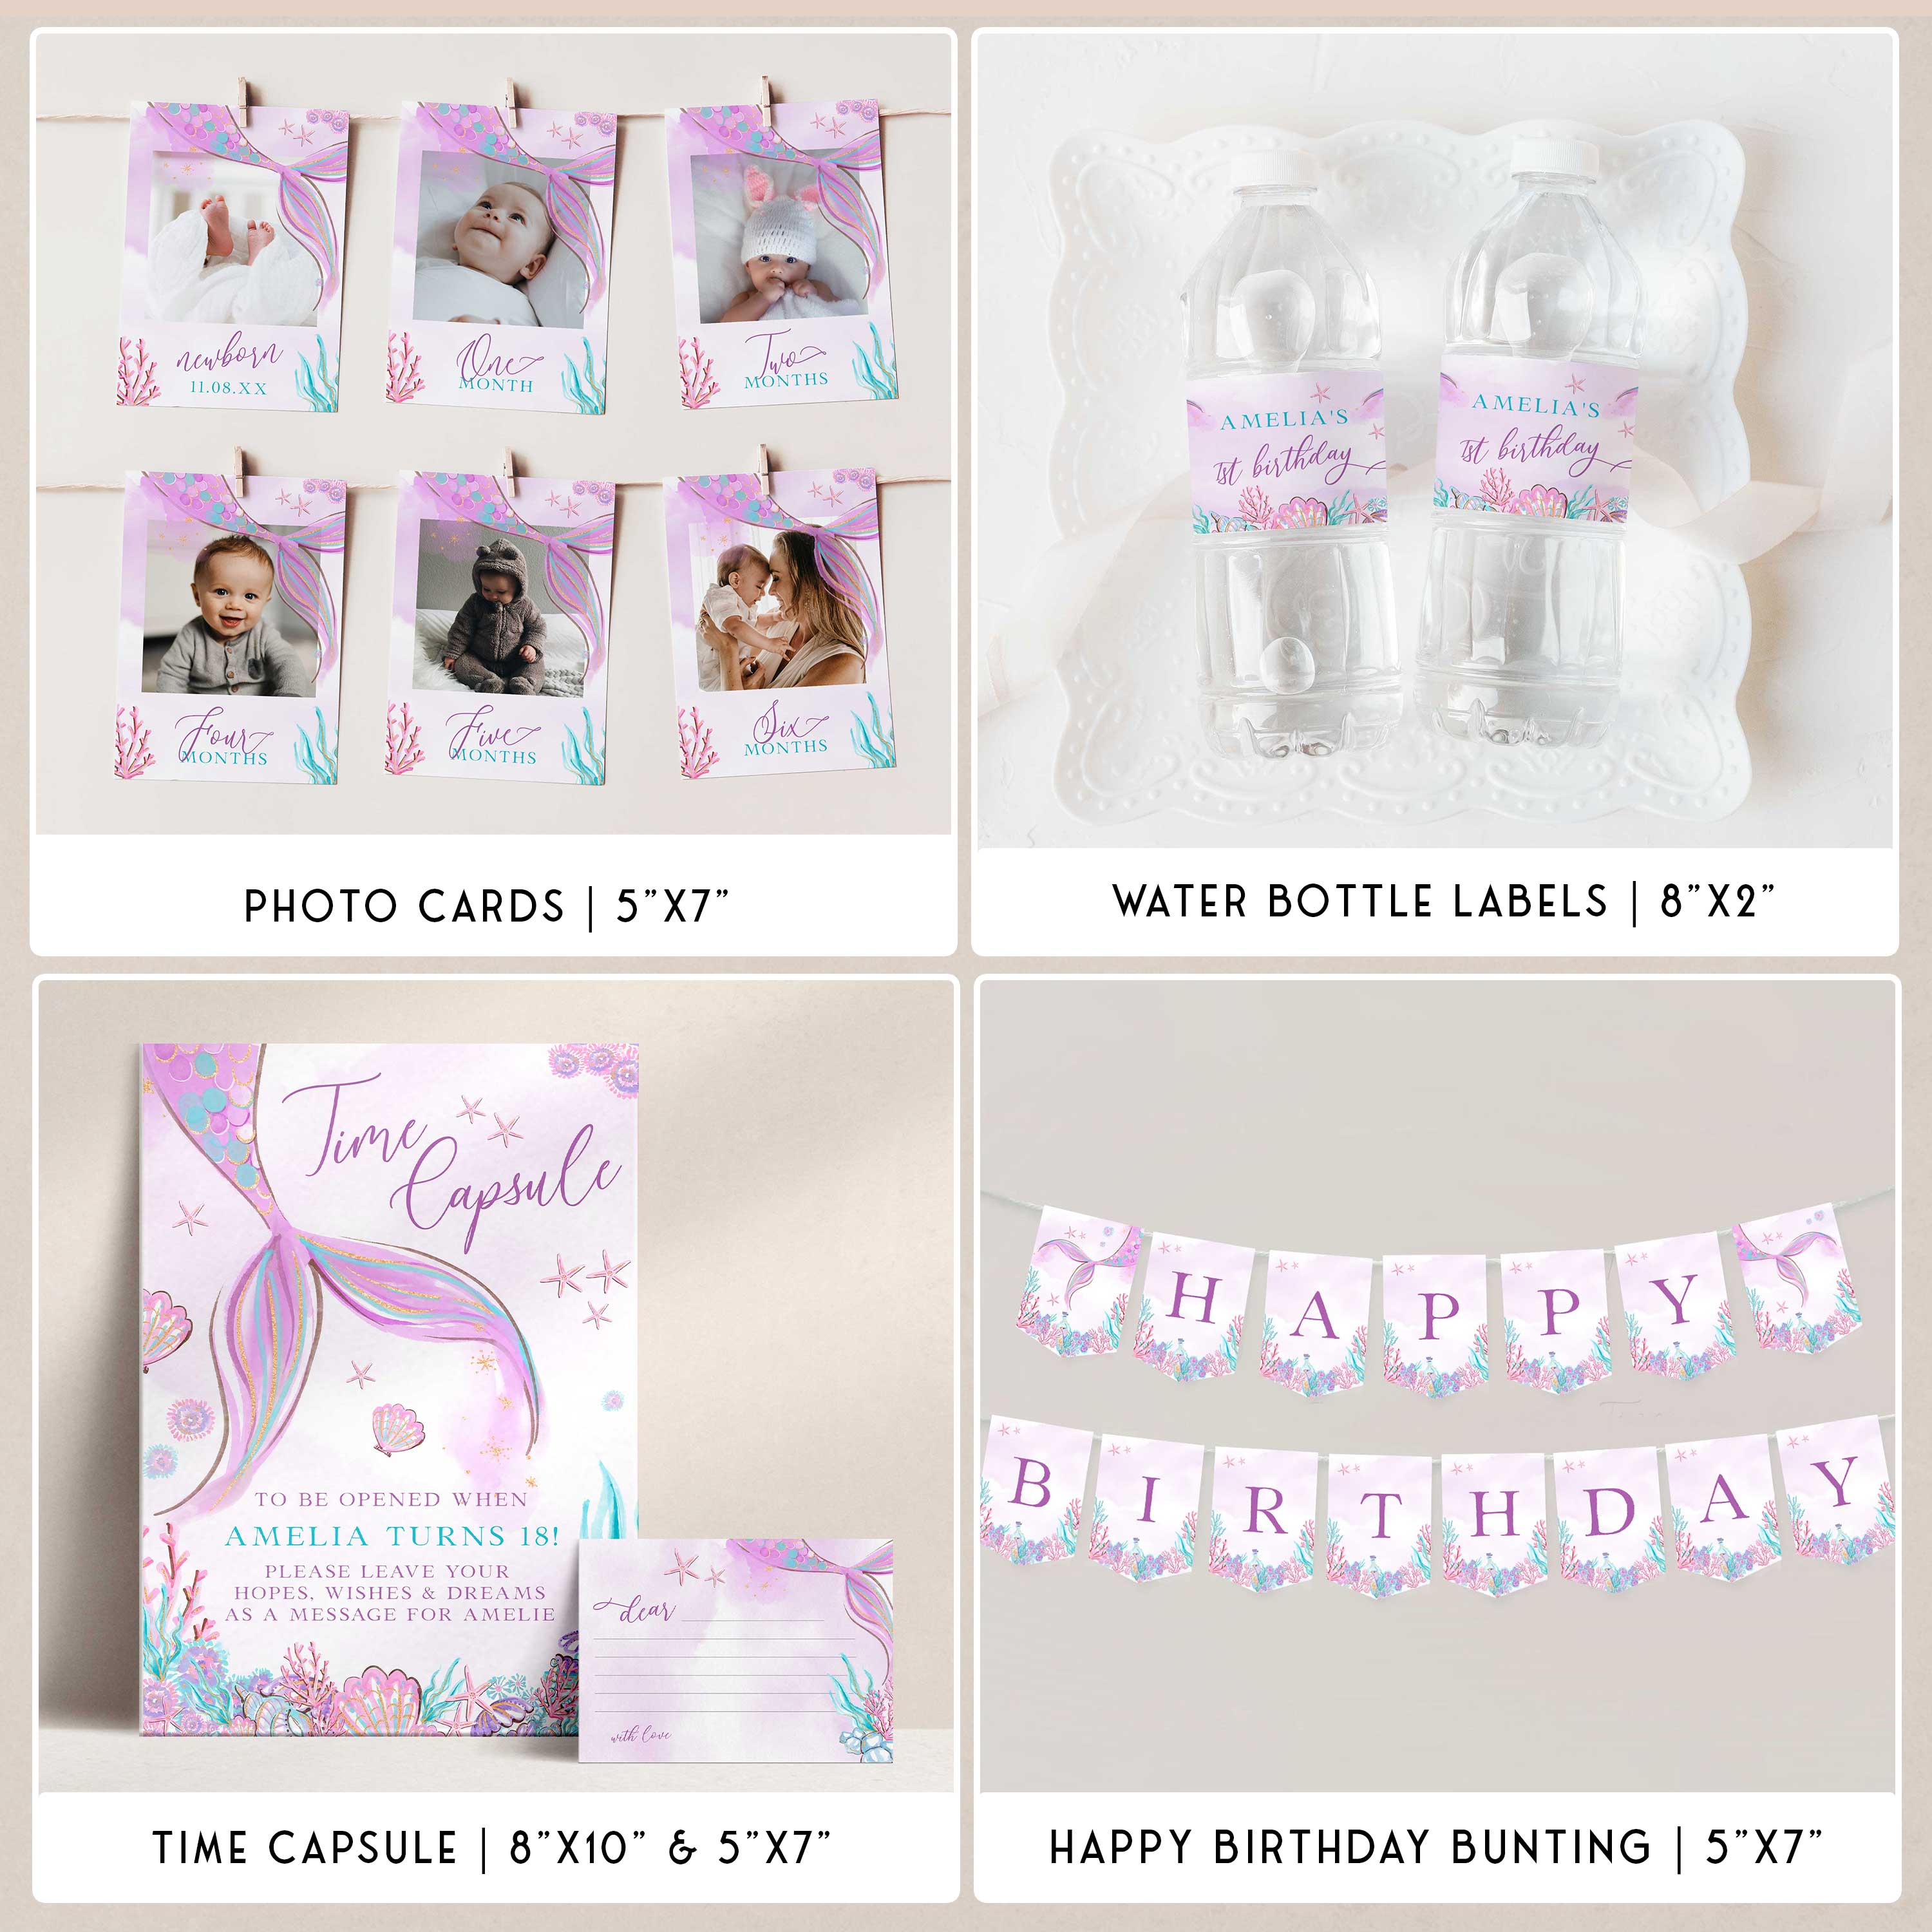 ONEder the sea first birthday party bundle including invitation set, welcome signs, my first year sign, bunting, cupcake toppers and more